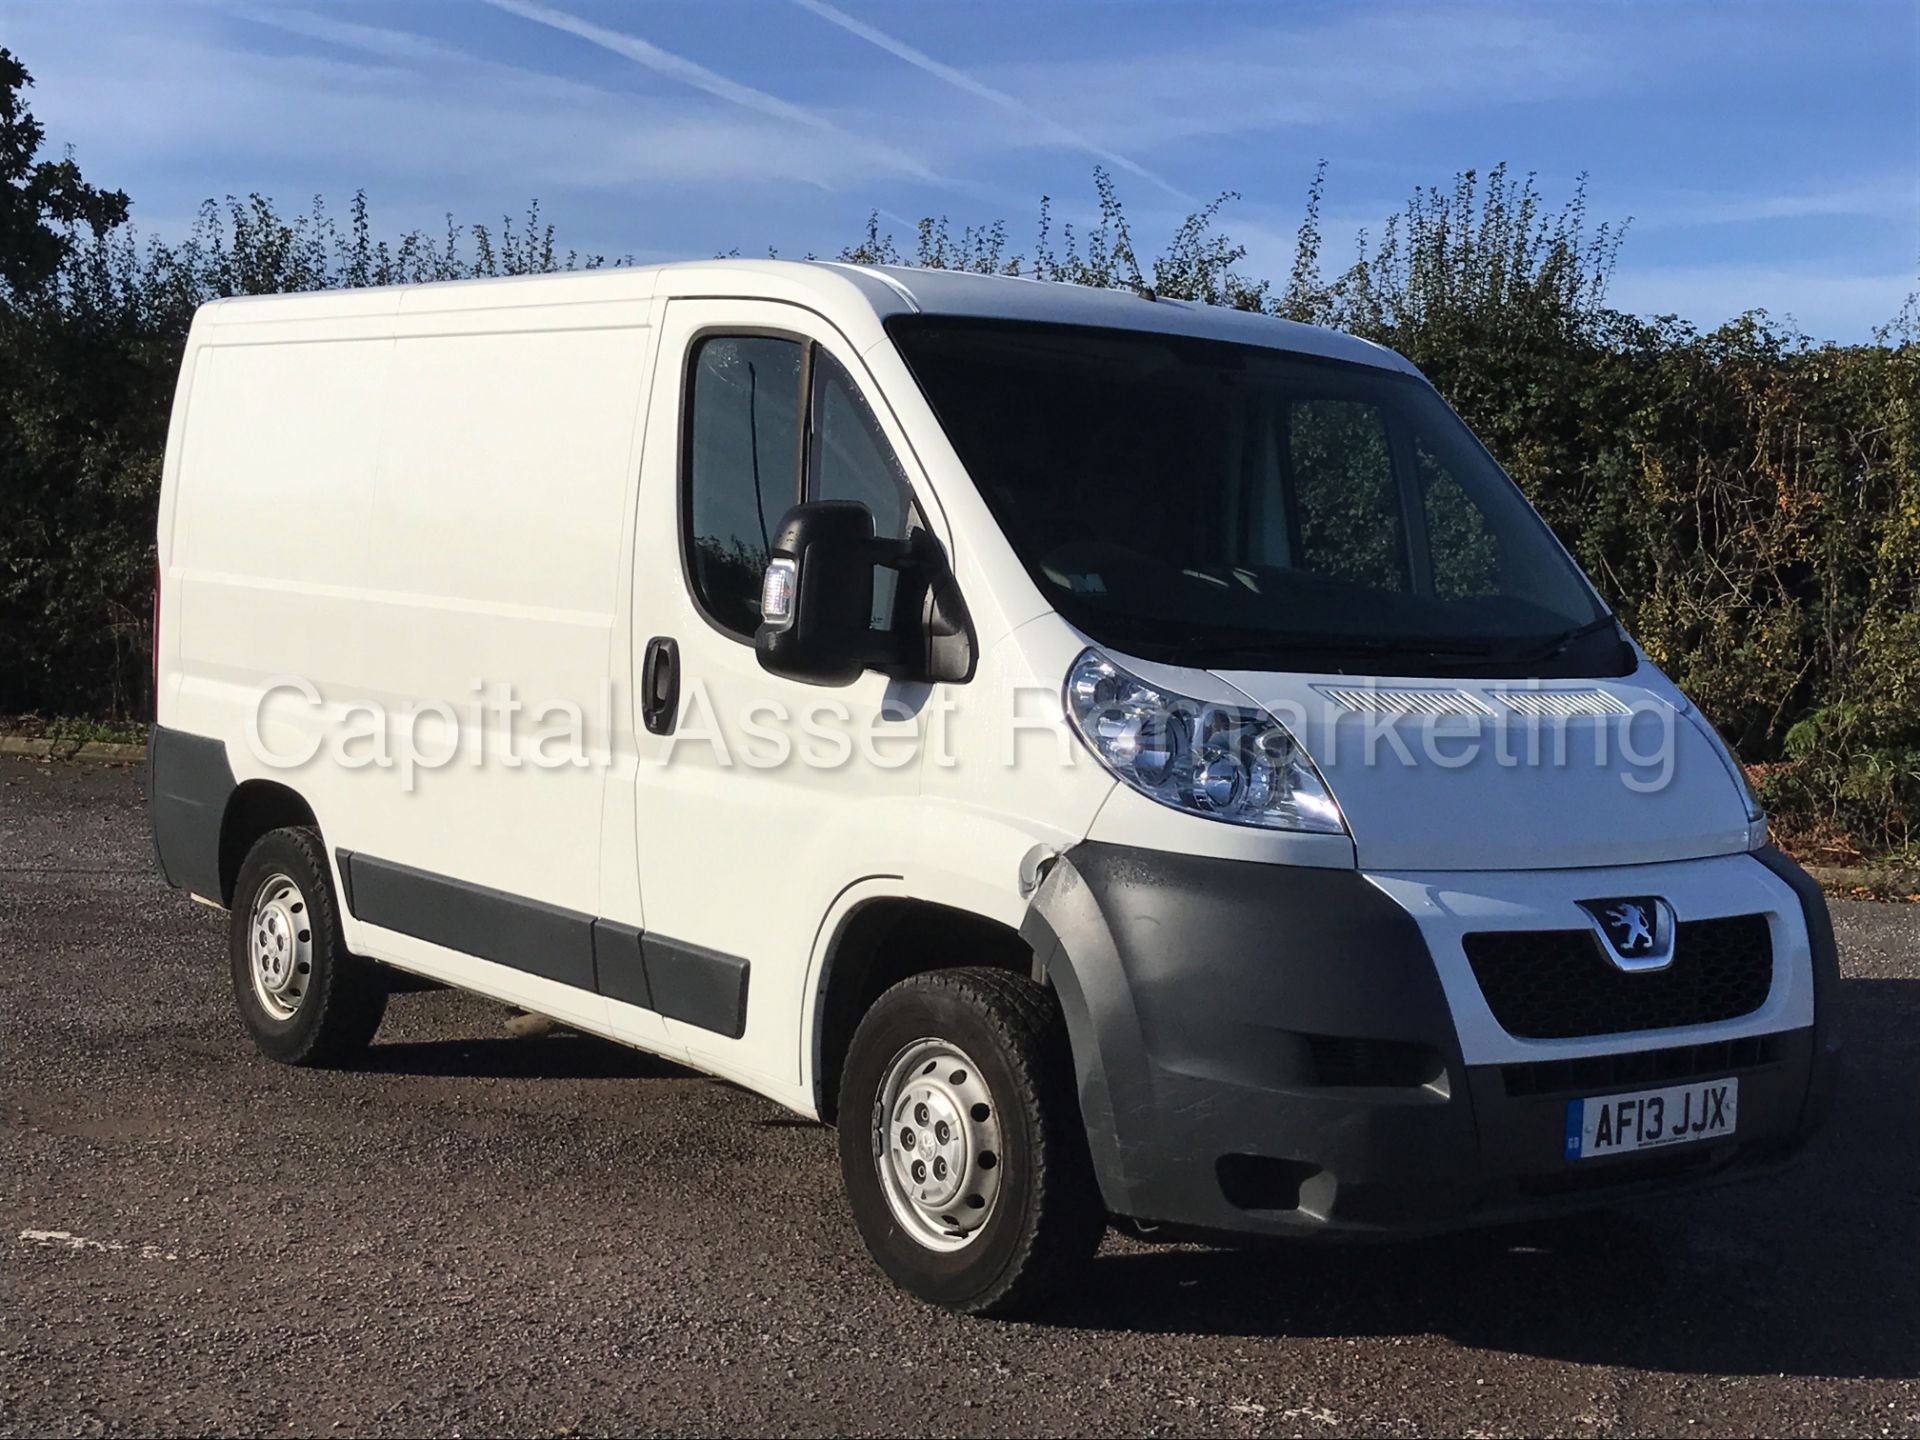 PEUGEOT BOXER 330 L1H1 (2013 - 13 REG) 'SWB - 2.2 HDI - 6 SPEED' (1 OWNER FROM NEW) **LOW MILES** - Image 2 of 19